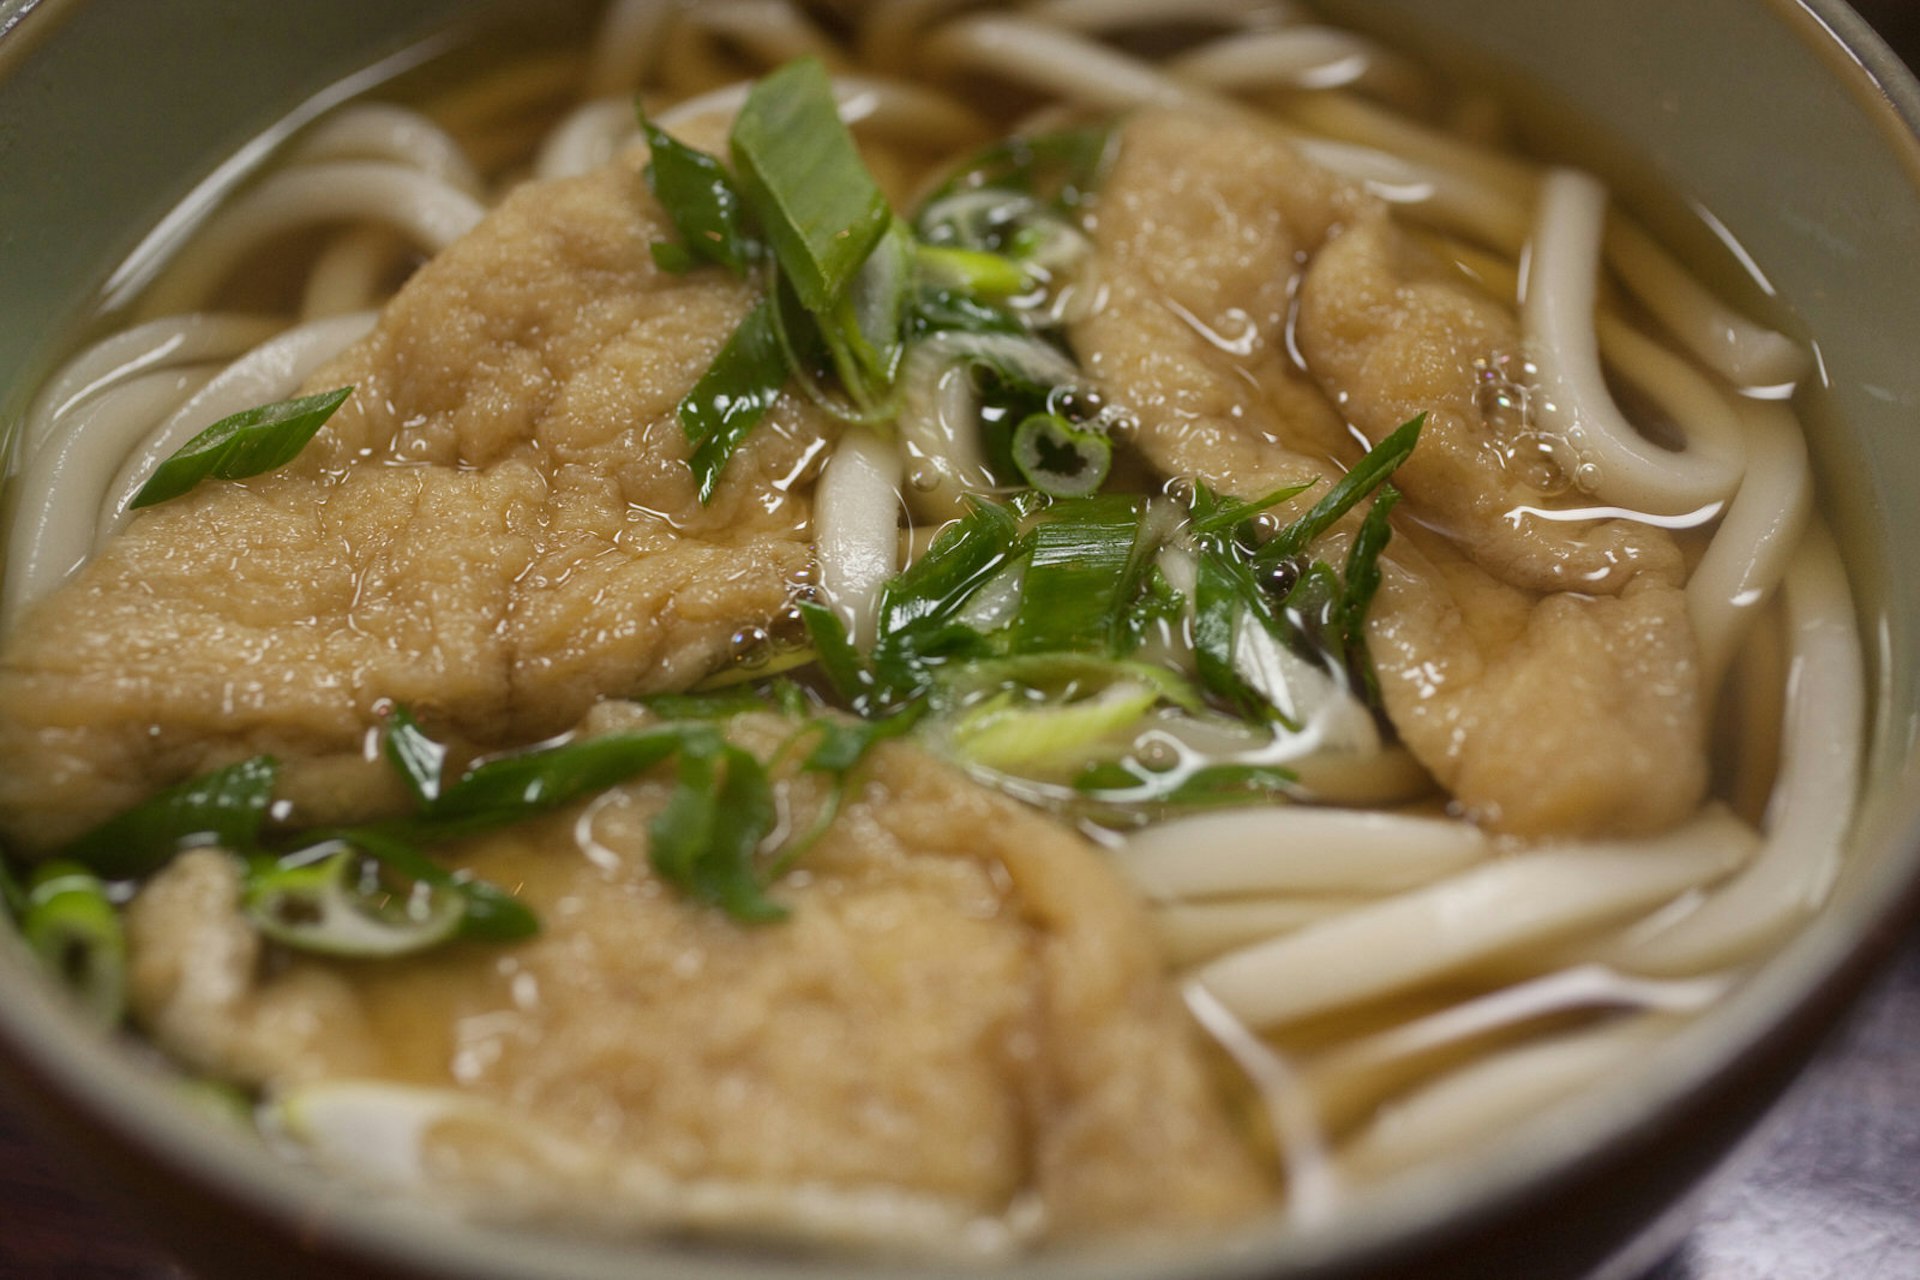 A close-up of a bowl of kitsune udon, showing tofu, noodles and dashi stock